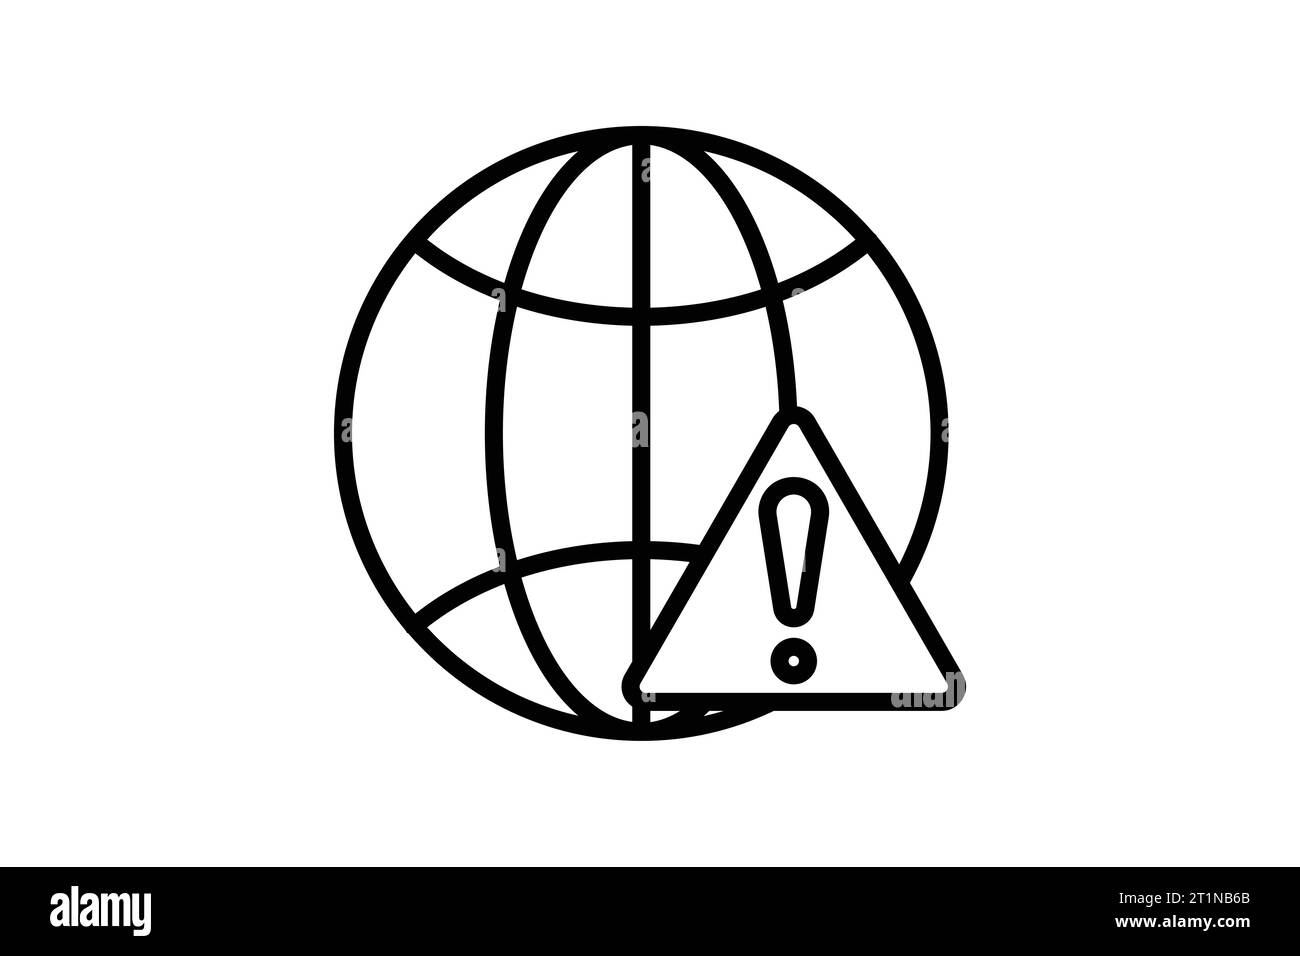 Network error icon. earth with exclamation mark. icon related to warning, notification. suitable for web site, app, user interfaces, printable etc. Li Stock Vector